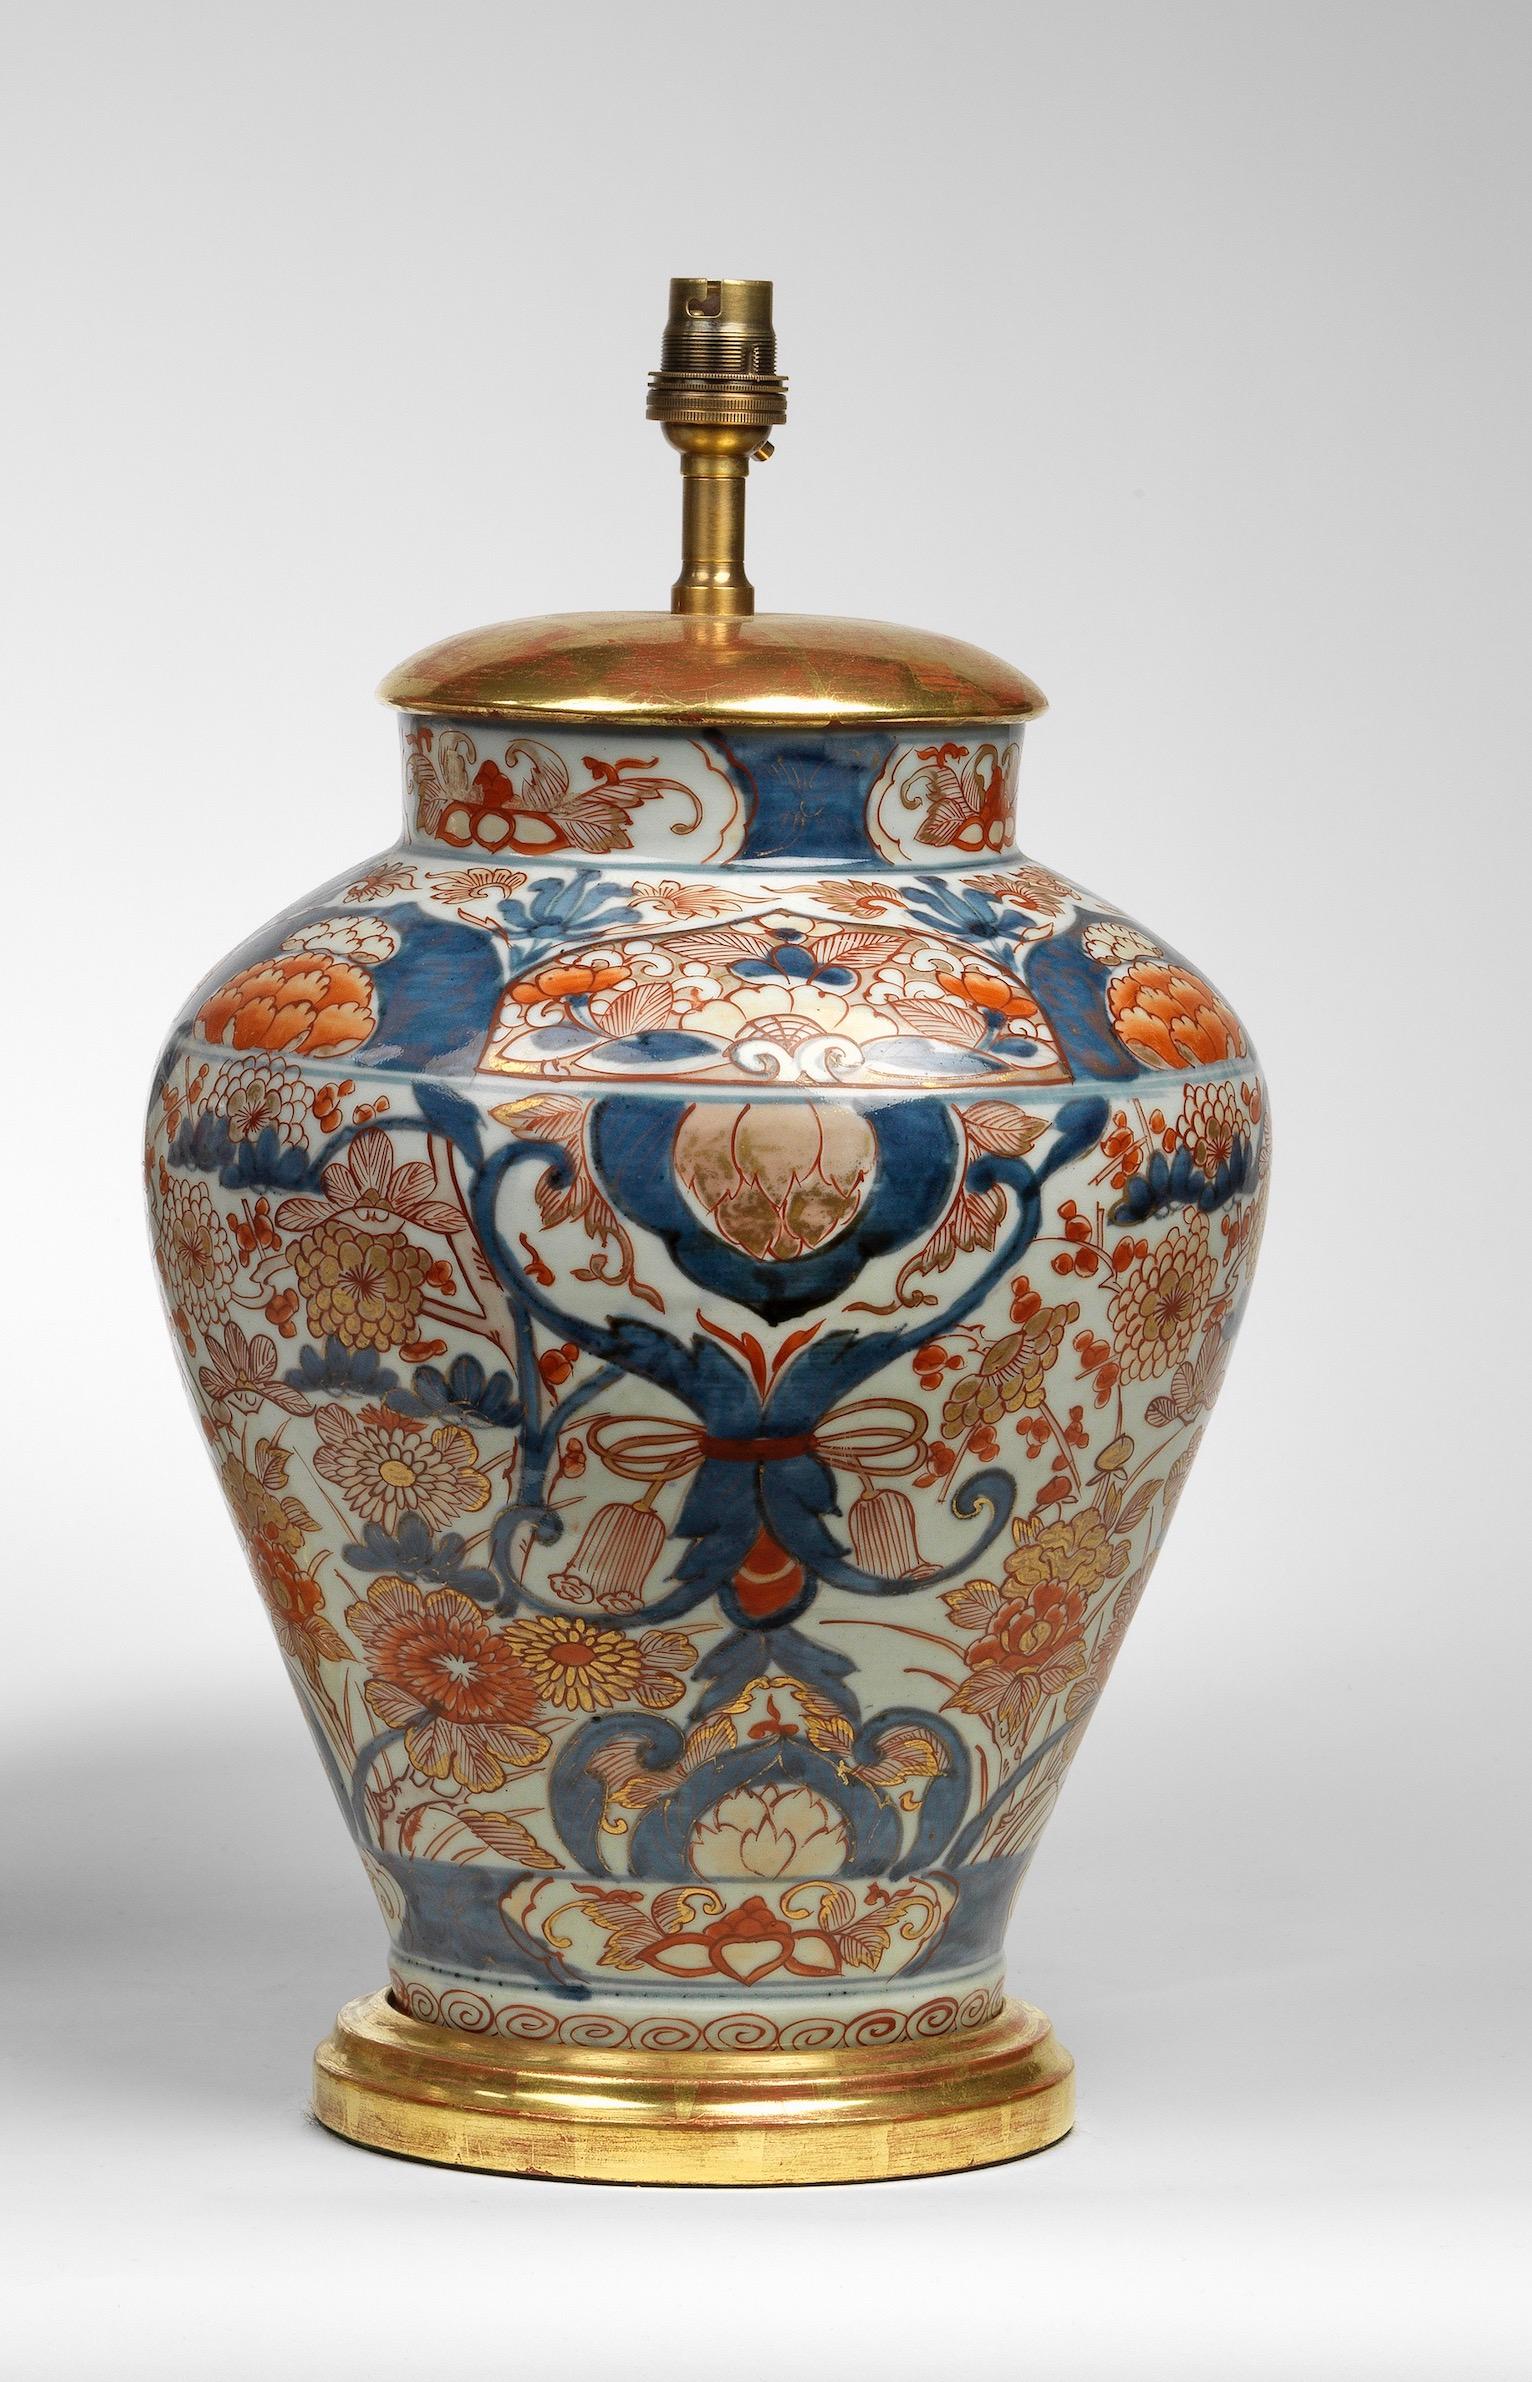 A fine 19th century Japanese Imari vase now mounted as a lamp, with typical tones of blue and coral on a white ground, profusely decorated and finely painted with chrysanthemums, foliage and phoenix birds. Fitted with a hand-gilded turned base and